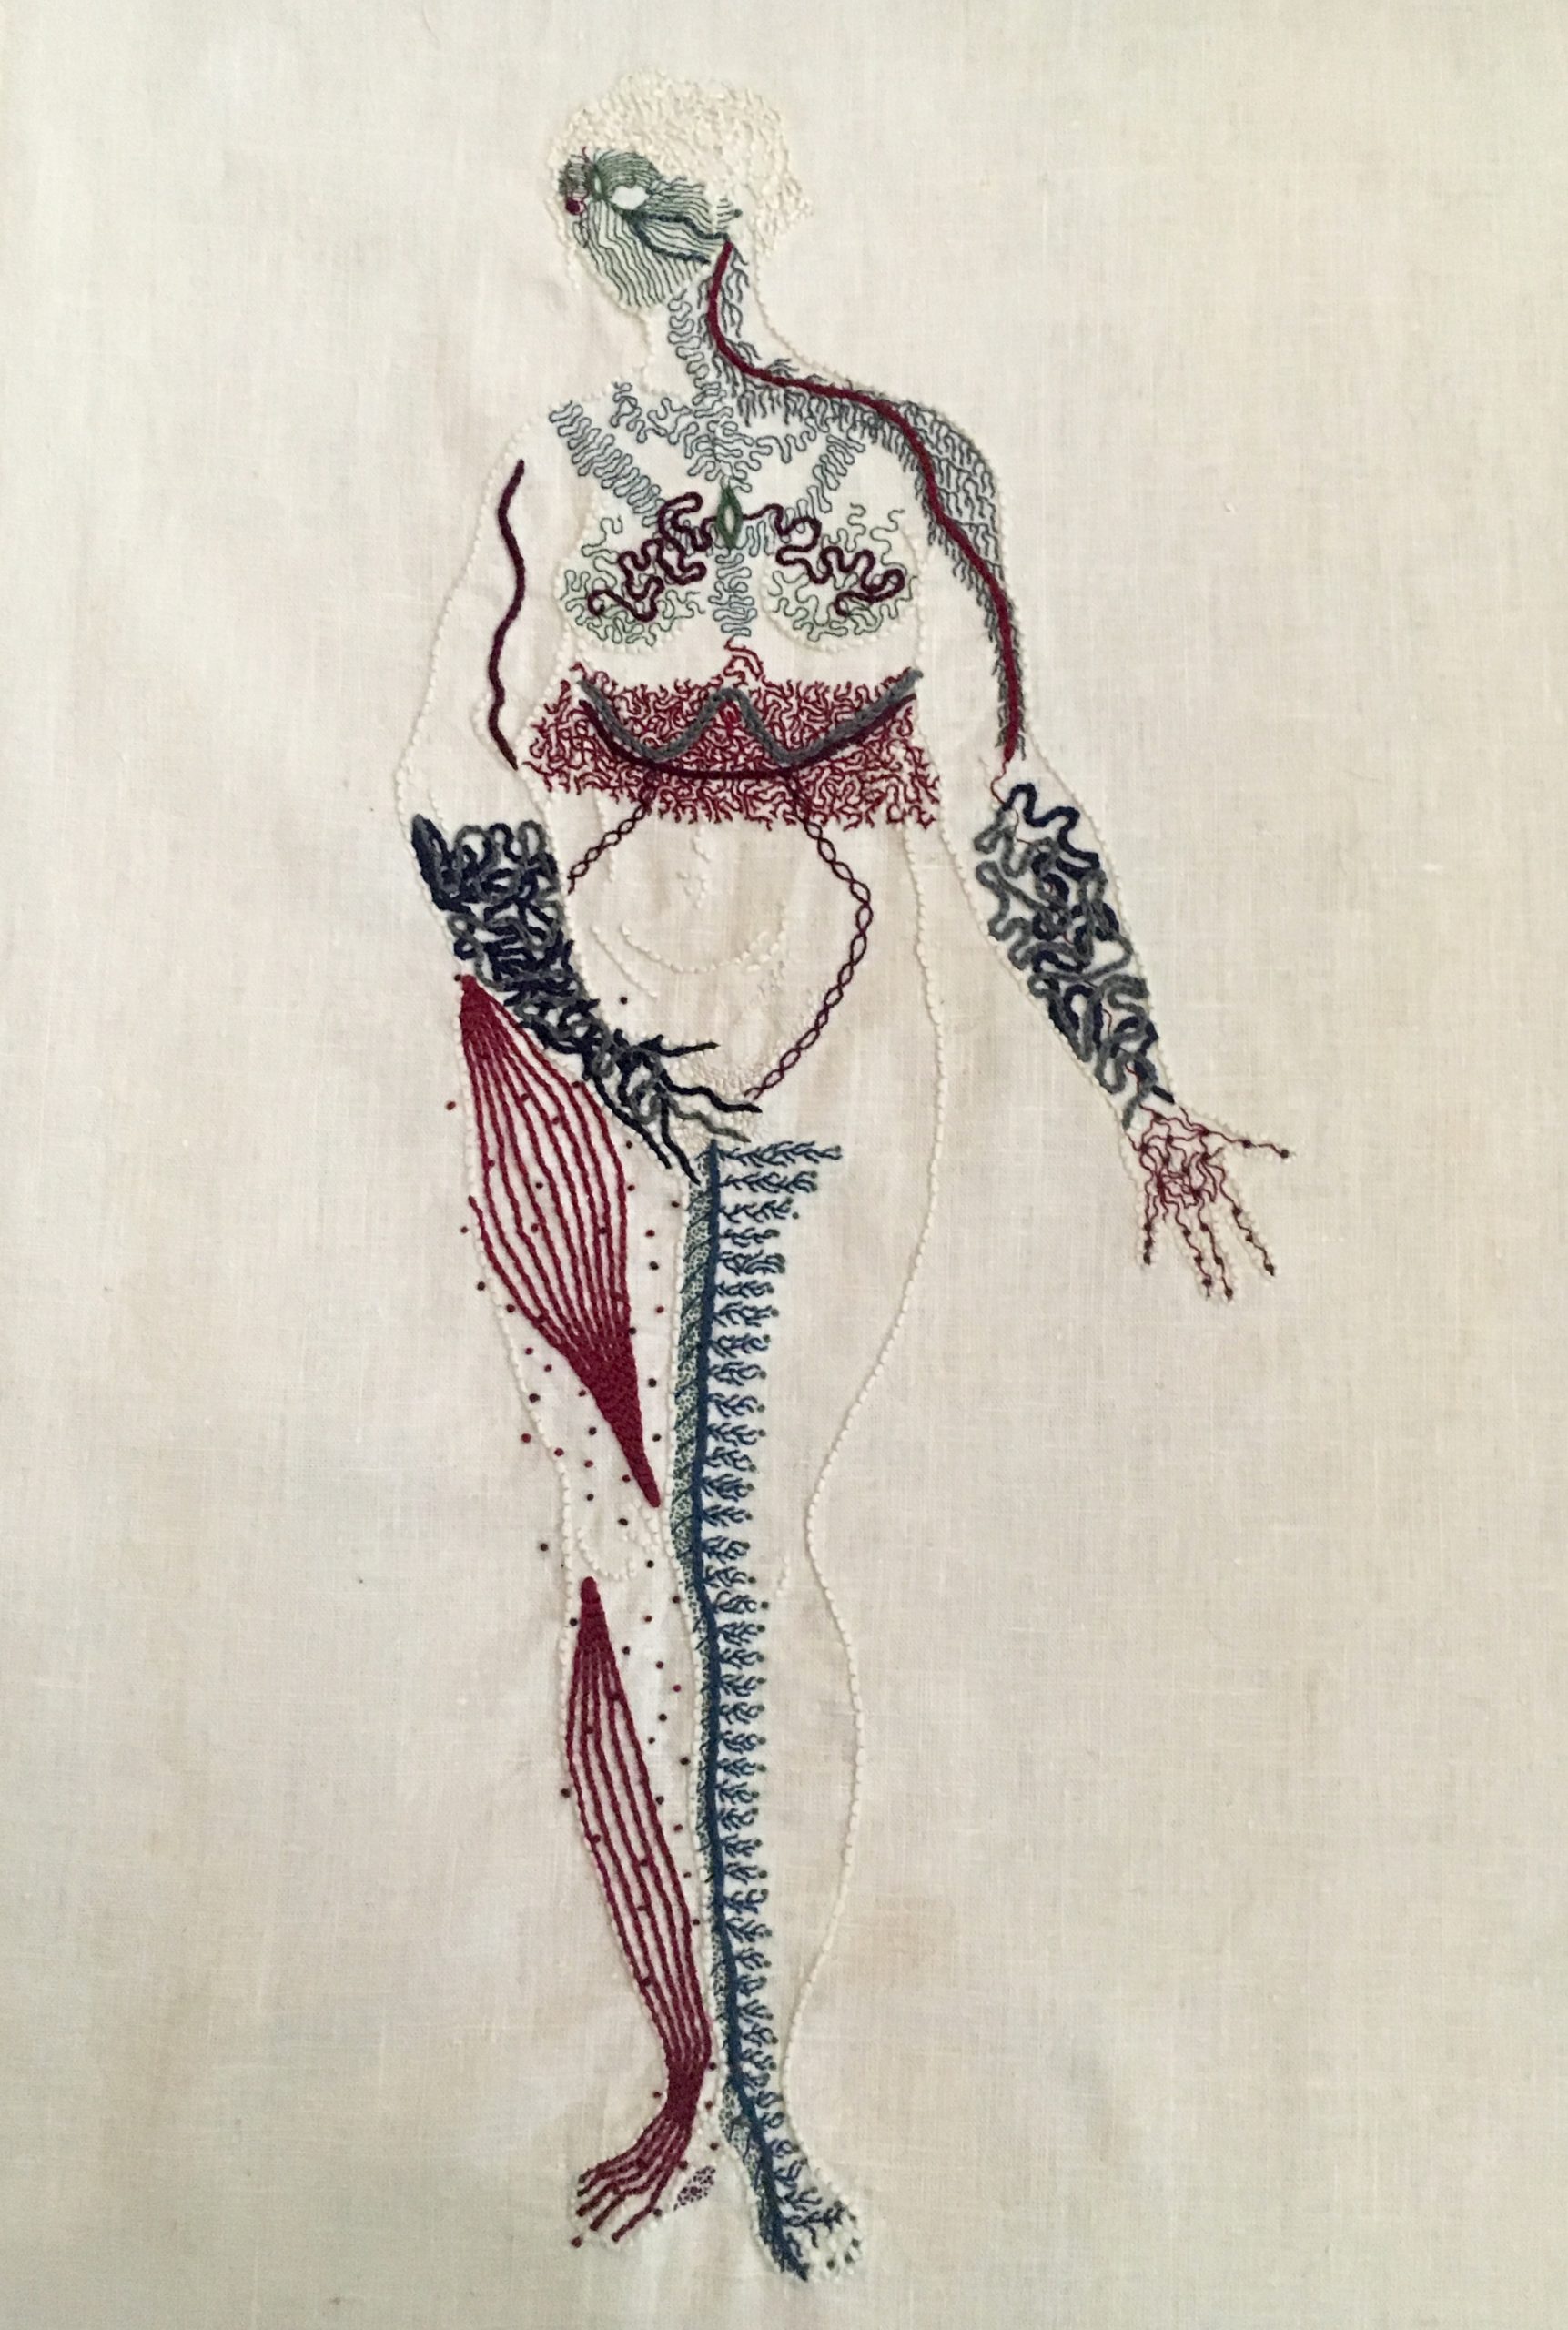 An outline of a naked woman is embroidered on linen in the same bone white colour as the linen. She stands legs together, her right hand covering her groin, her left hand, palm up, extended slightly to her side. She looks to the right. Her entire body except for her belly is covered in intricate markings representing different neurological sensations. Her face is a mask of green lines, feathery grey lines cover her shoulders and chest. There is a thick band of intricate burgundy stitching around her waist. Her forearms and hands are covered in thick blue undulant lines. Her right leg has bands of burgundy along the muscles, with small dots around them. Her inner left leg has a thick line of blue running up it, with thin branches spreading towards her outer leg.